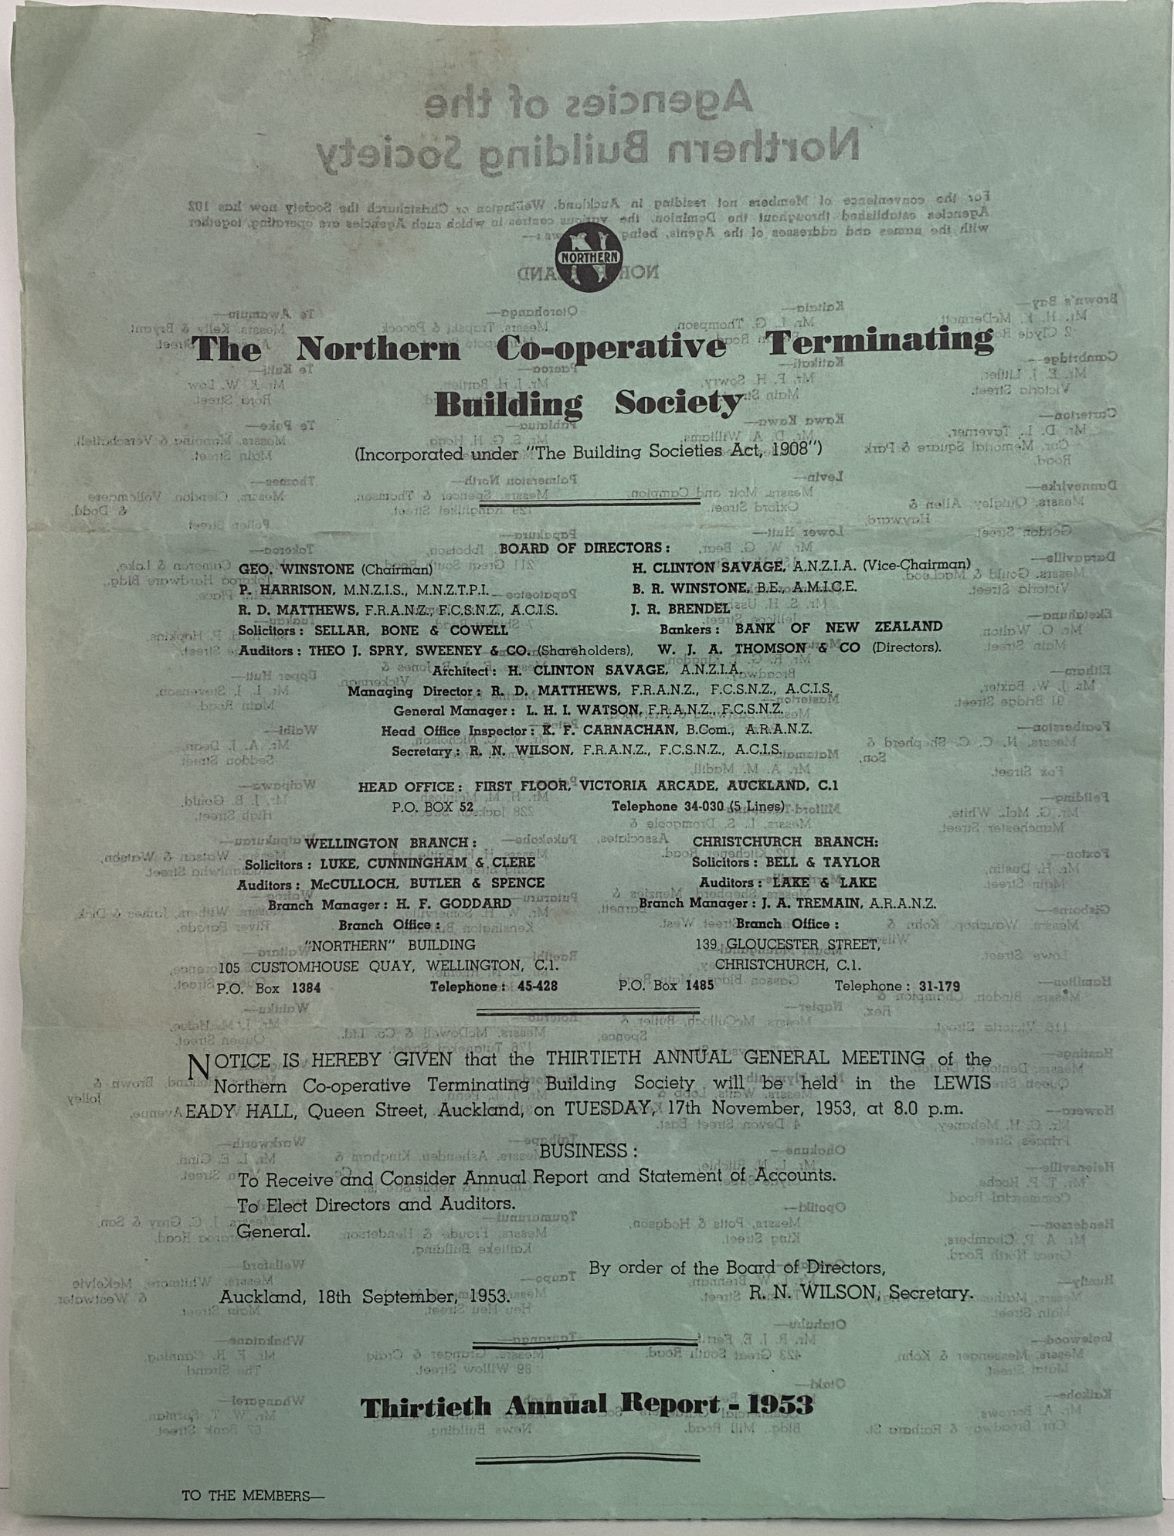 ANNUAL REPORT: The Northern Co-operative Terminating Building Society 1953